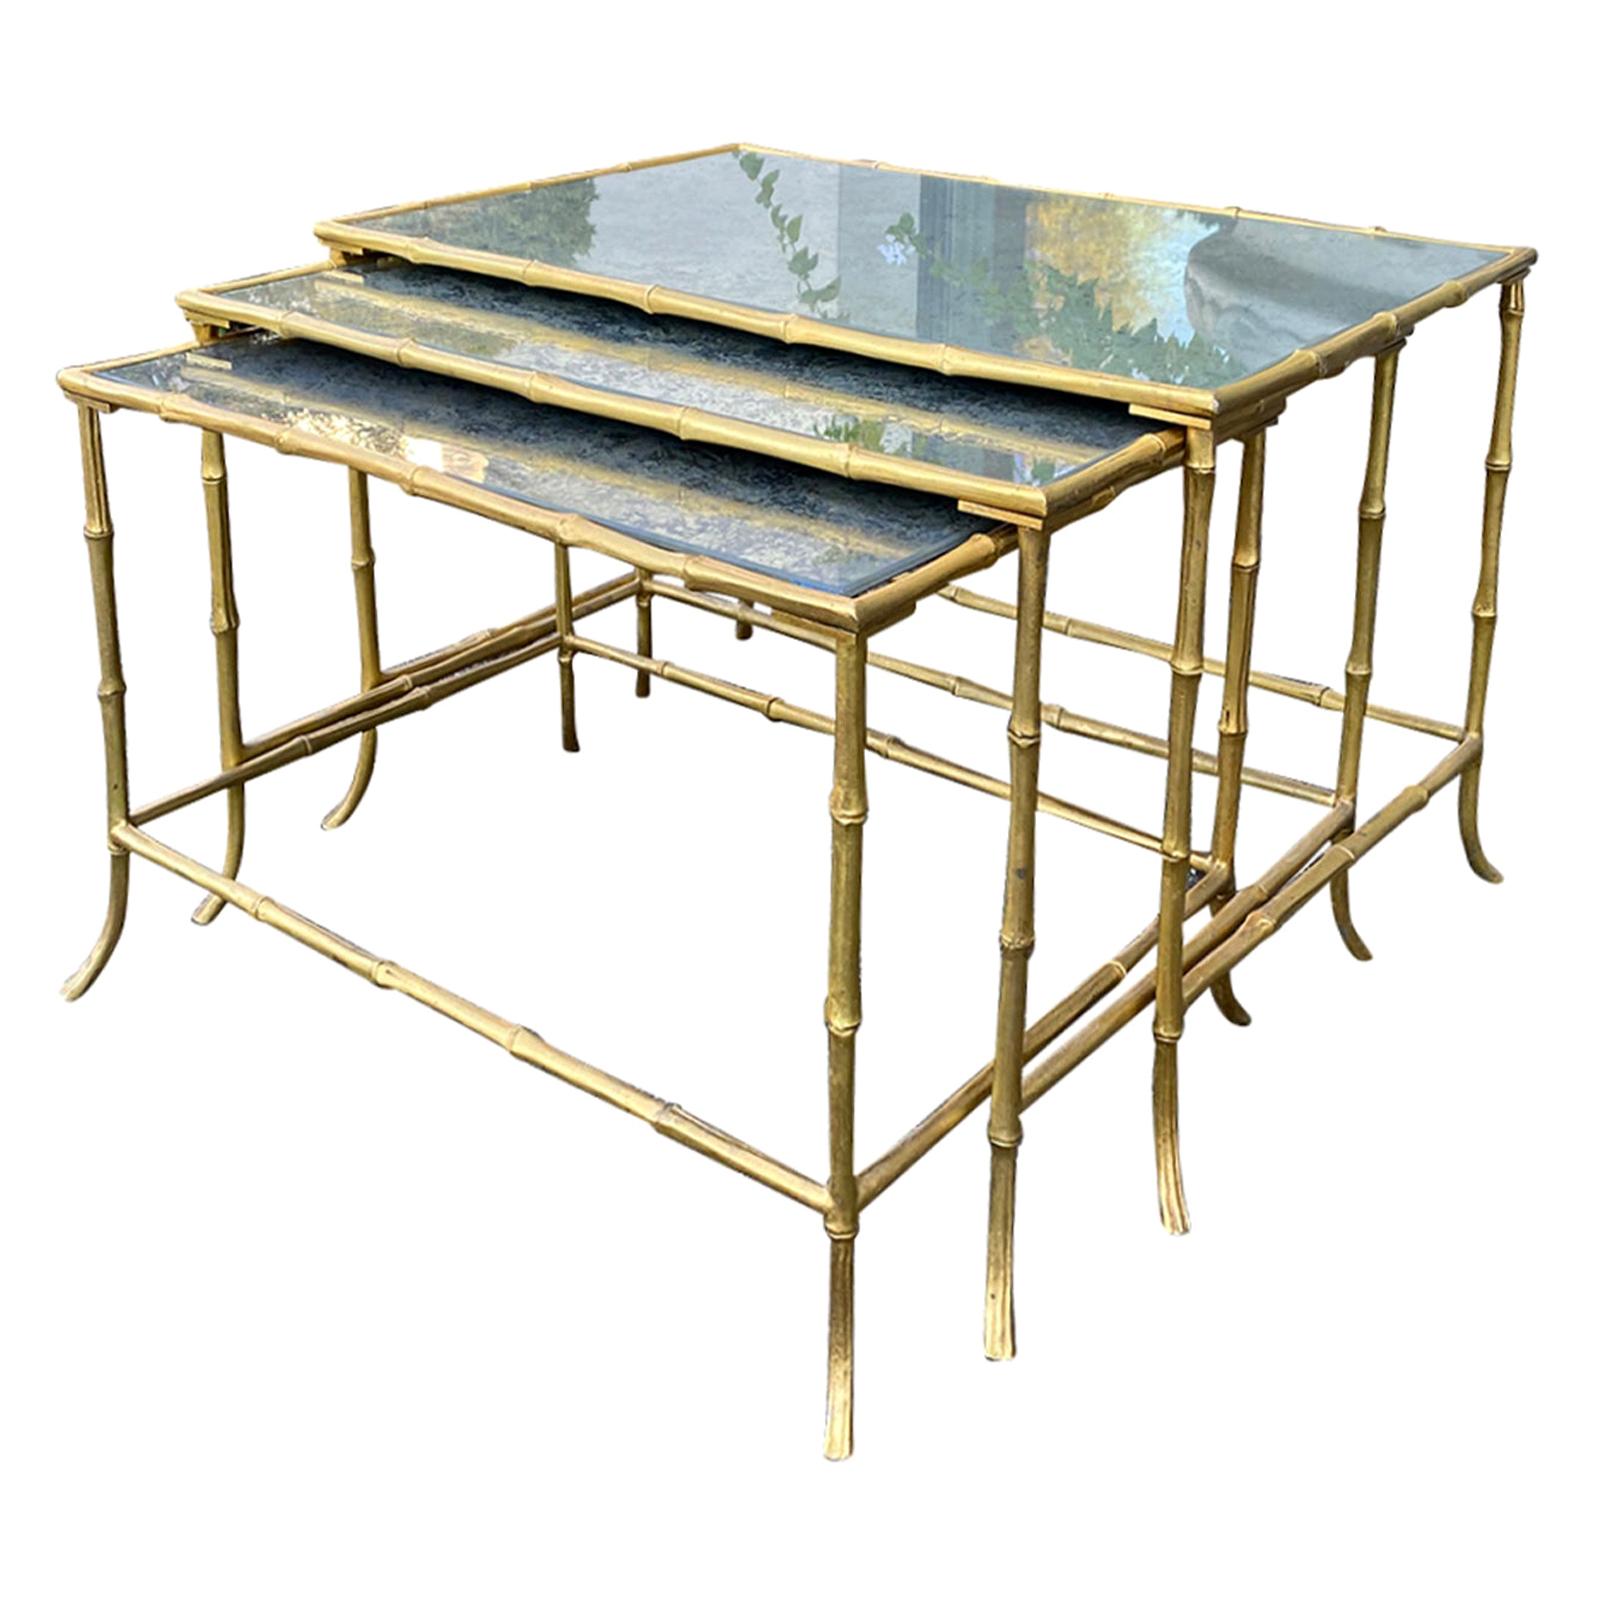 Set of 3 Maison Baguès Style Bronze Faux Bamboo Nesting Tables with Mirror Tops For Sale